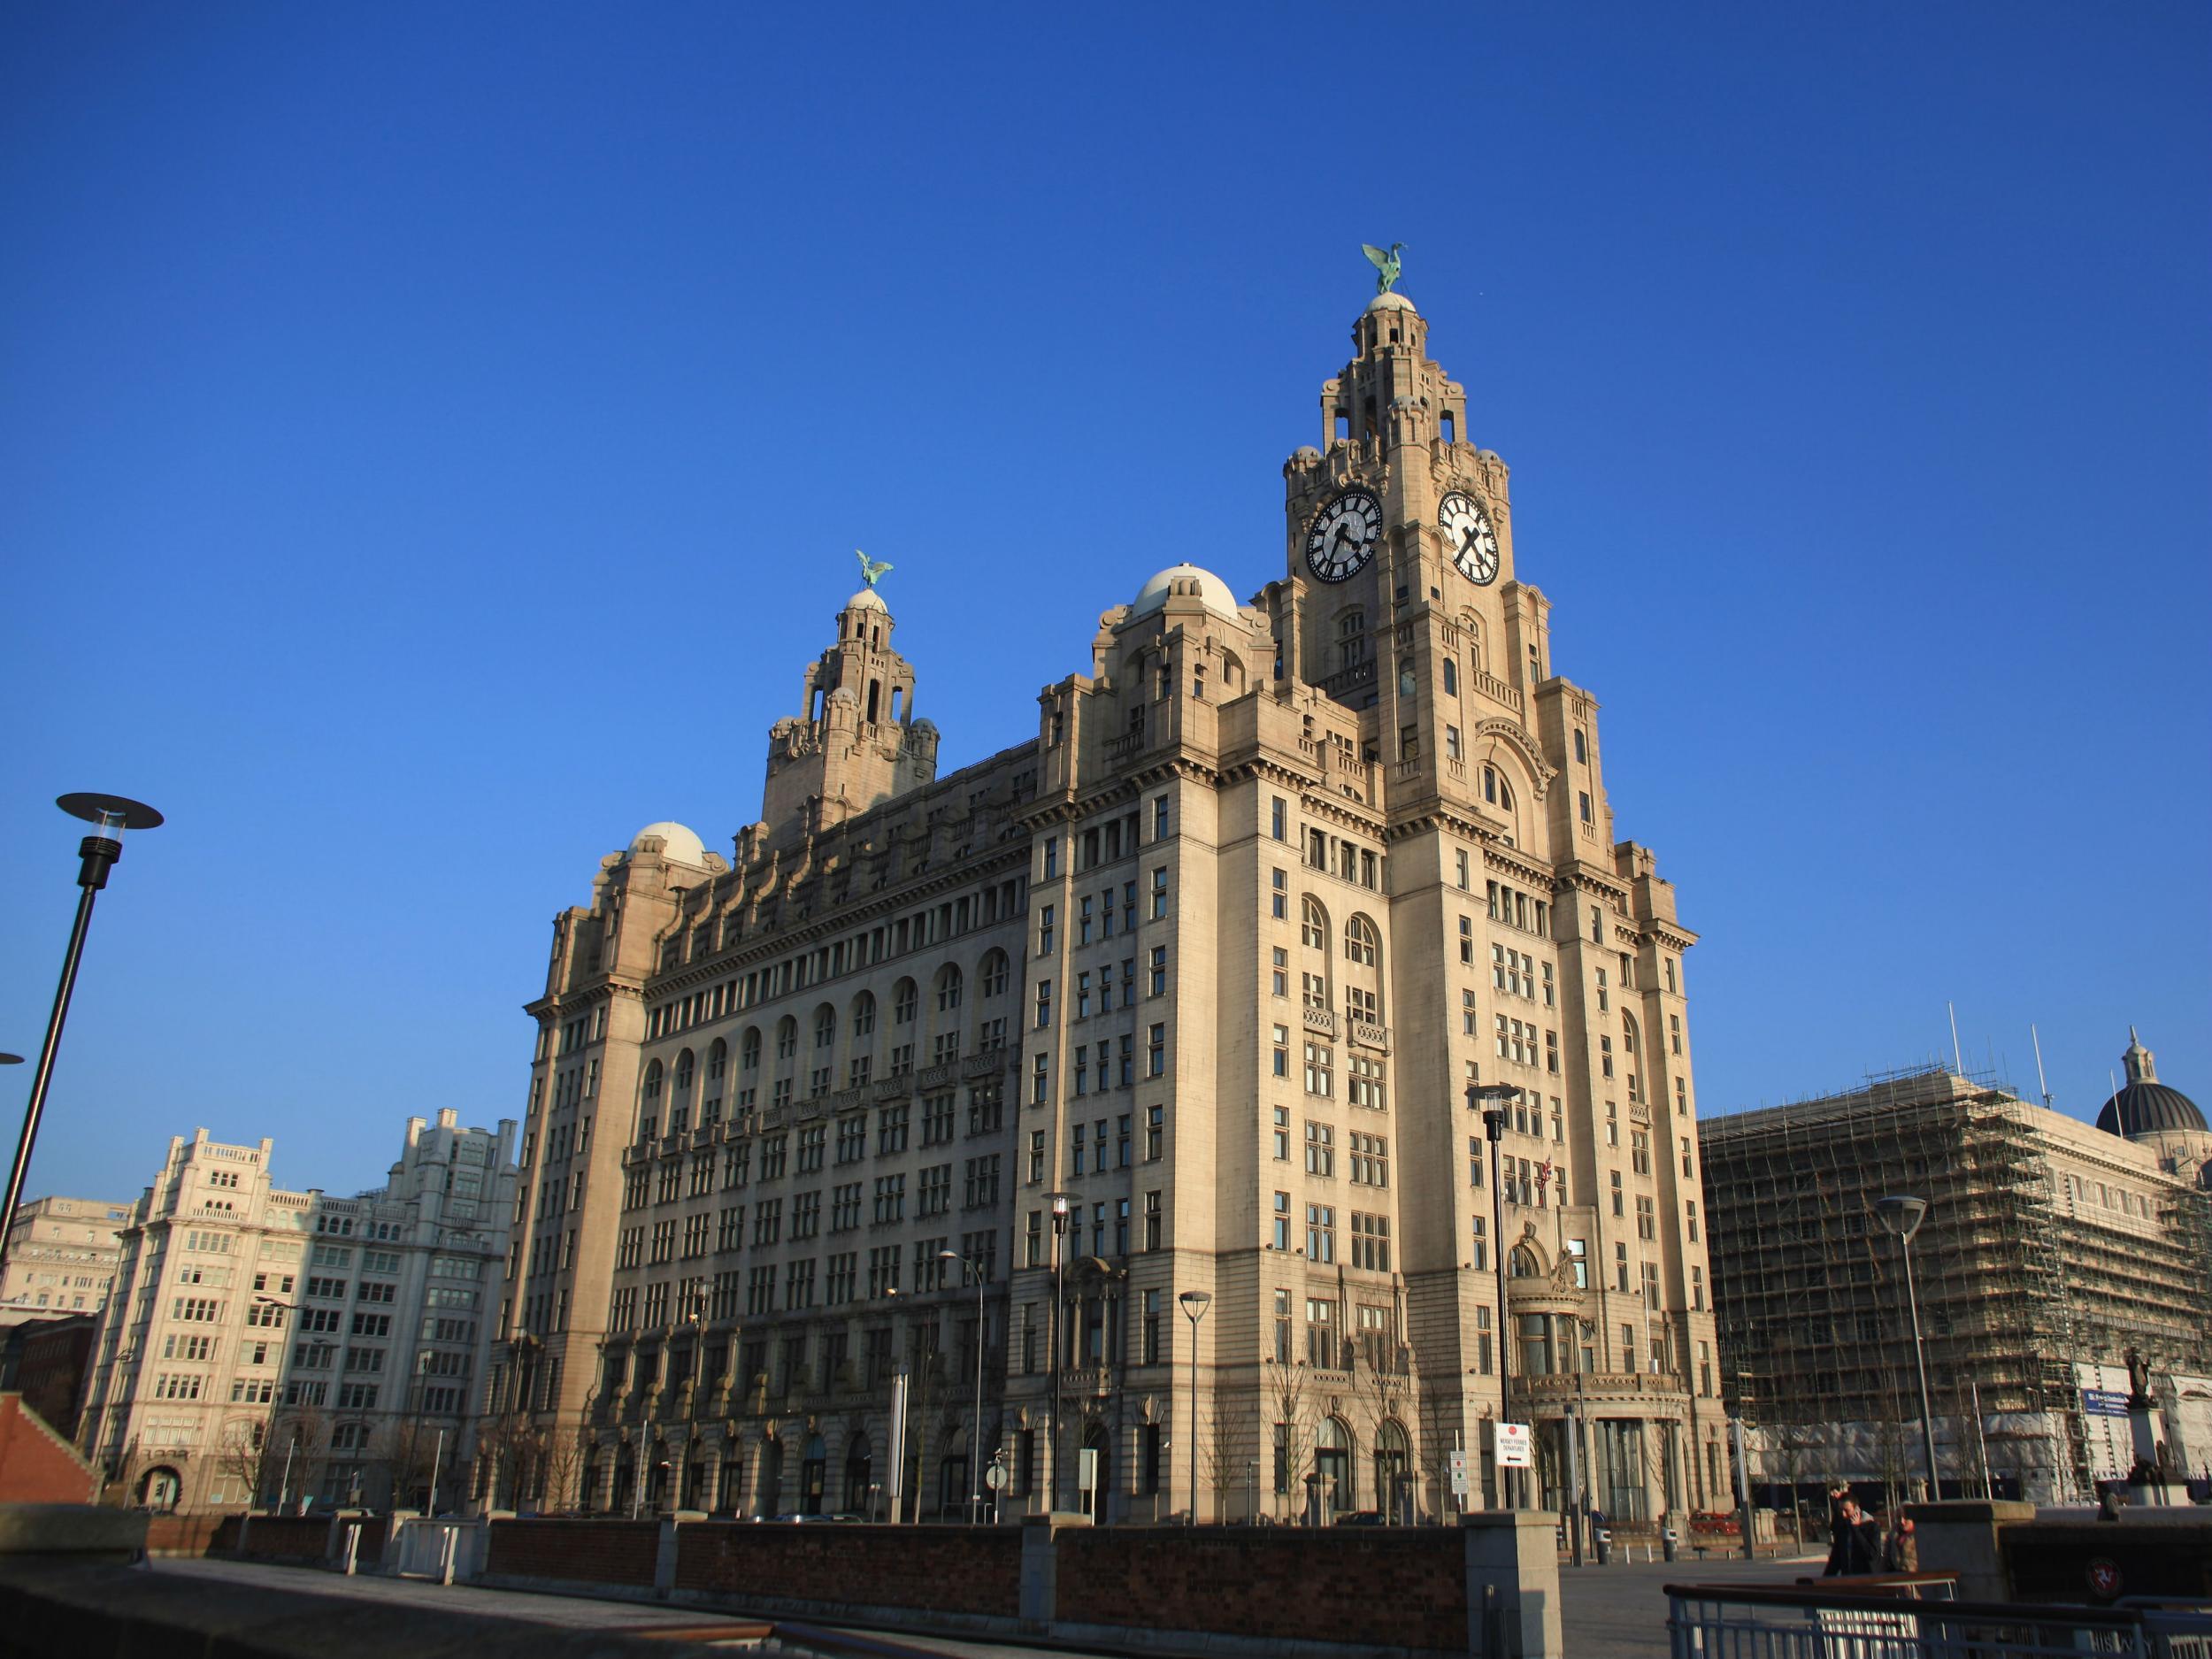 The incident took place in Liverpool city centre